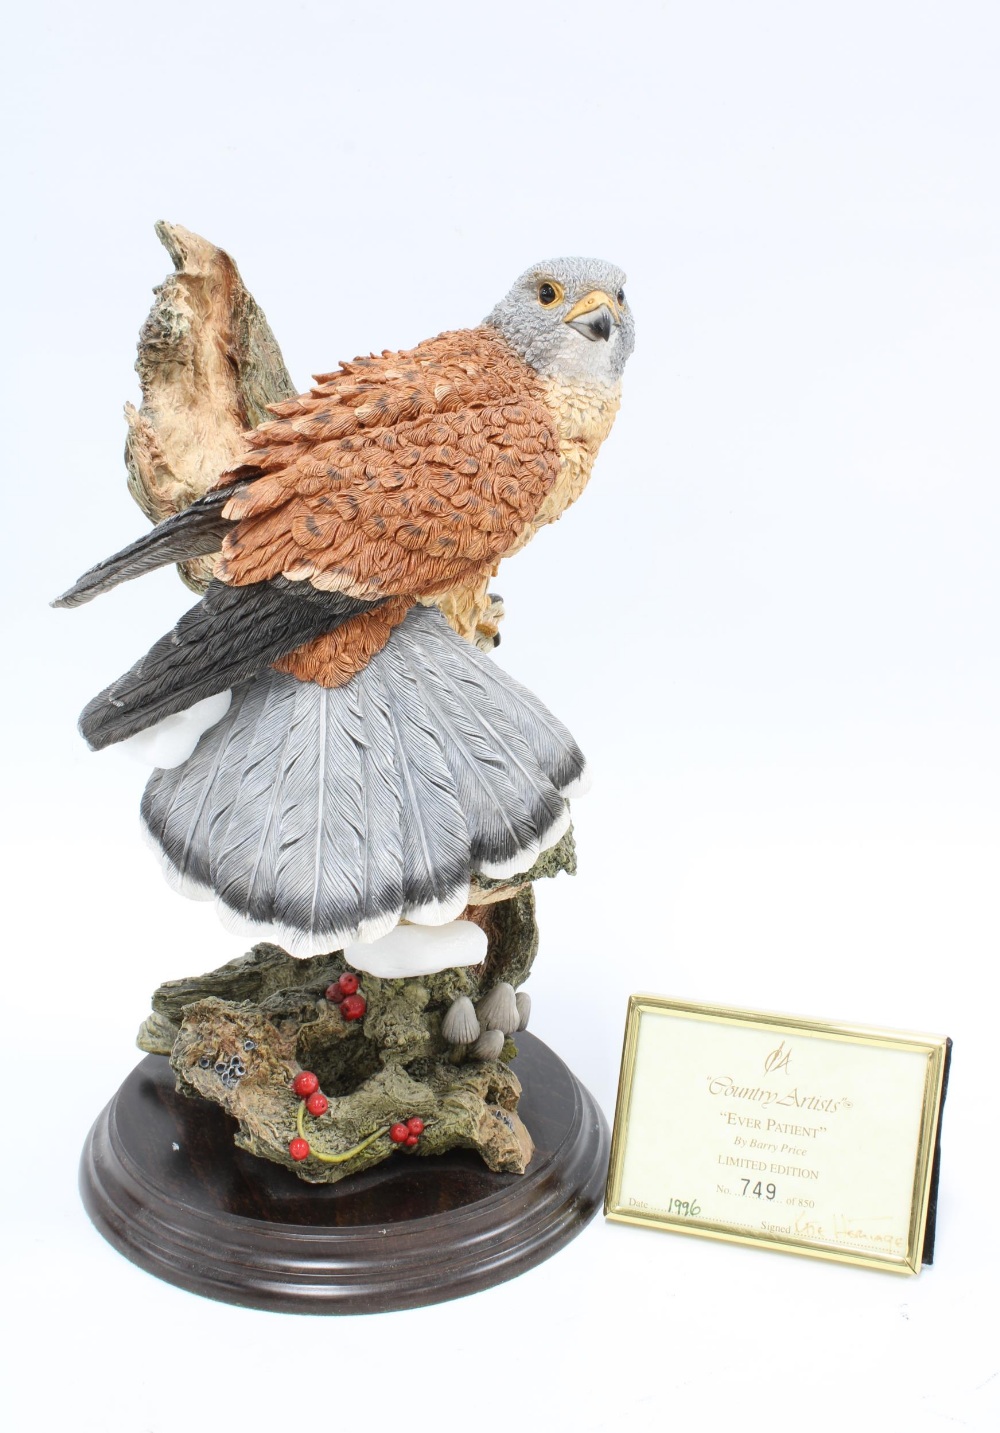 A limited edition Country Artists sculpture 'Ever Patient', modelled by Barry Price, no. 749/850, on